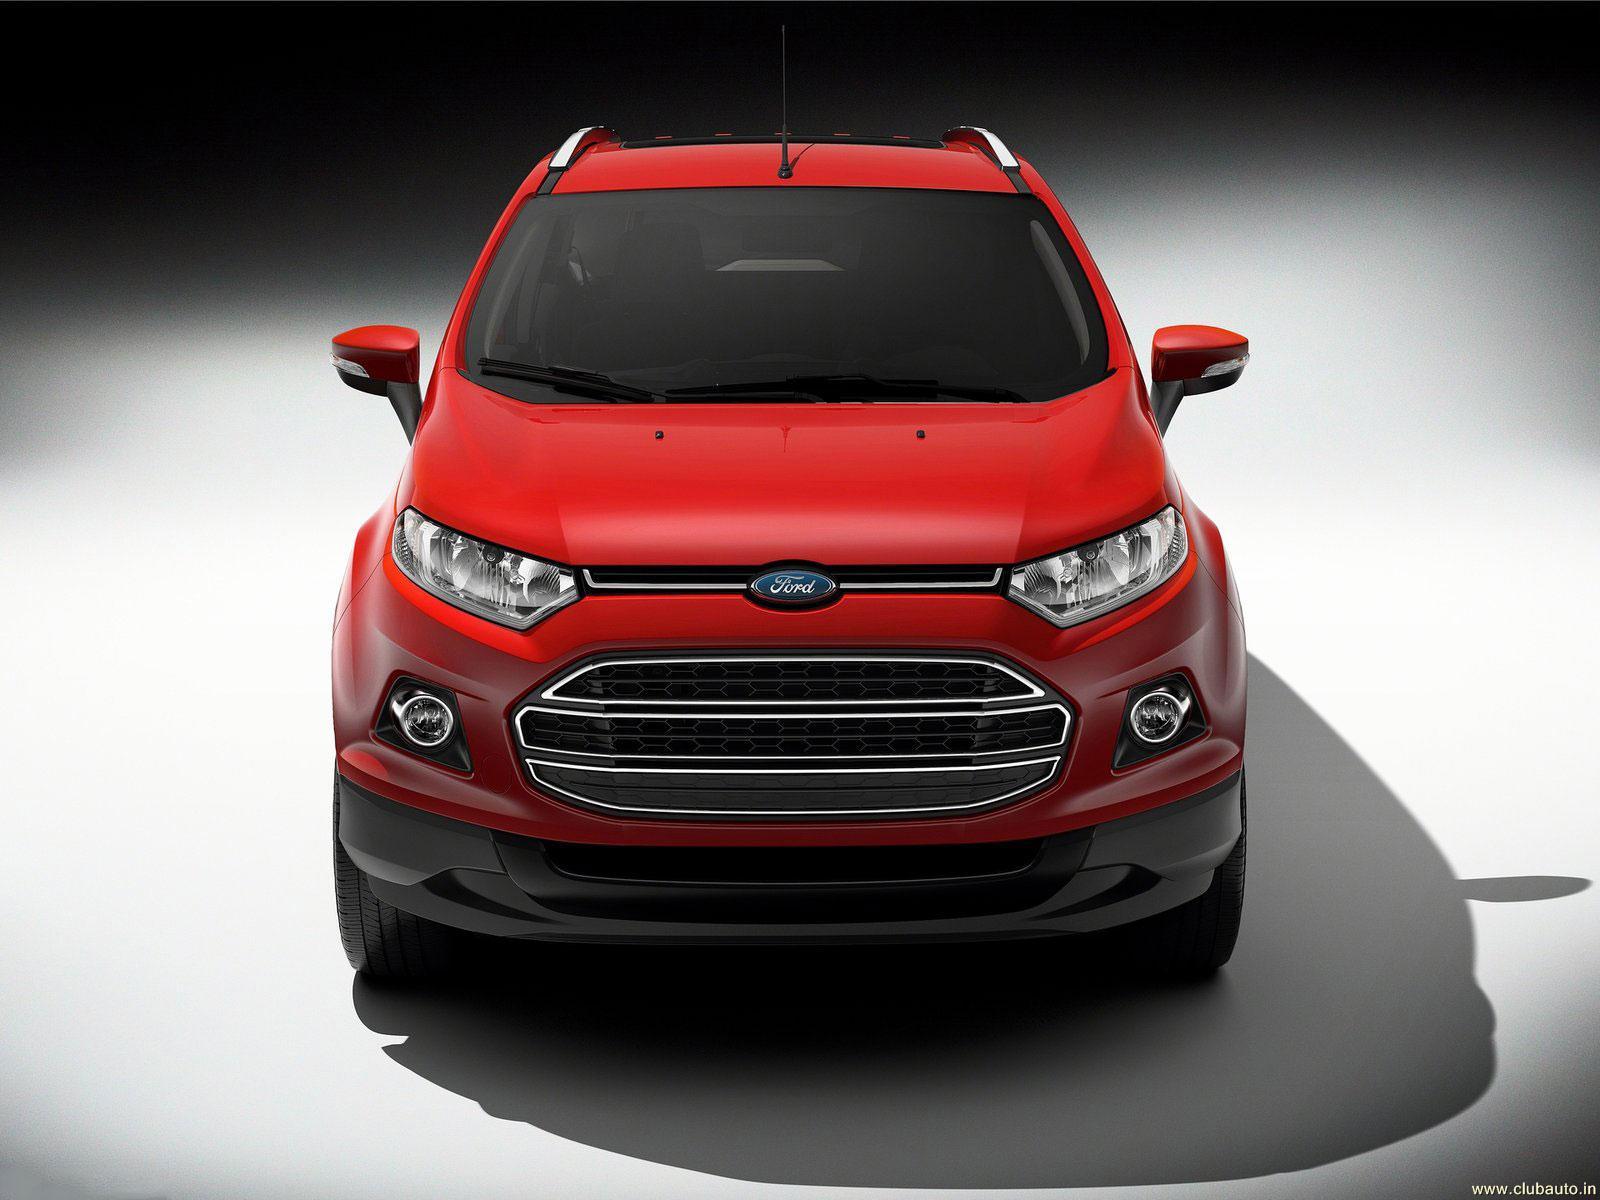 Wallpaper > Cars > Ford > EcoSport > Ford EcoSport high quality